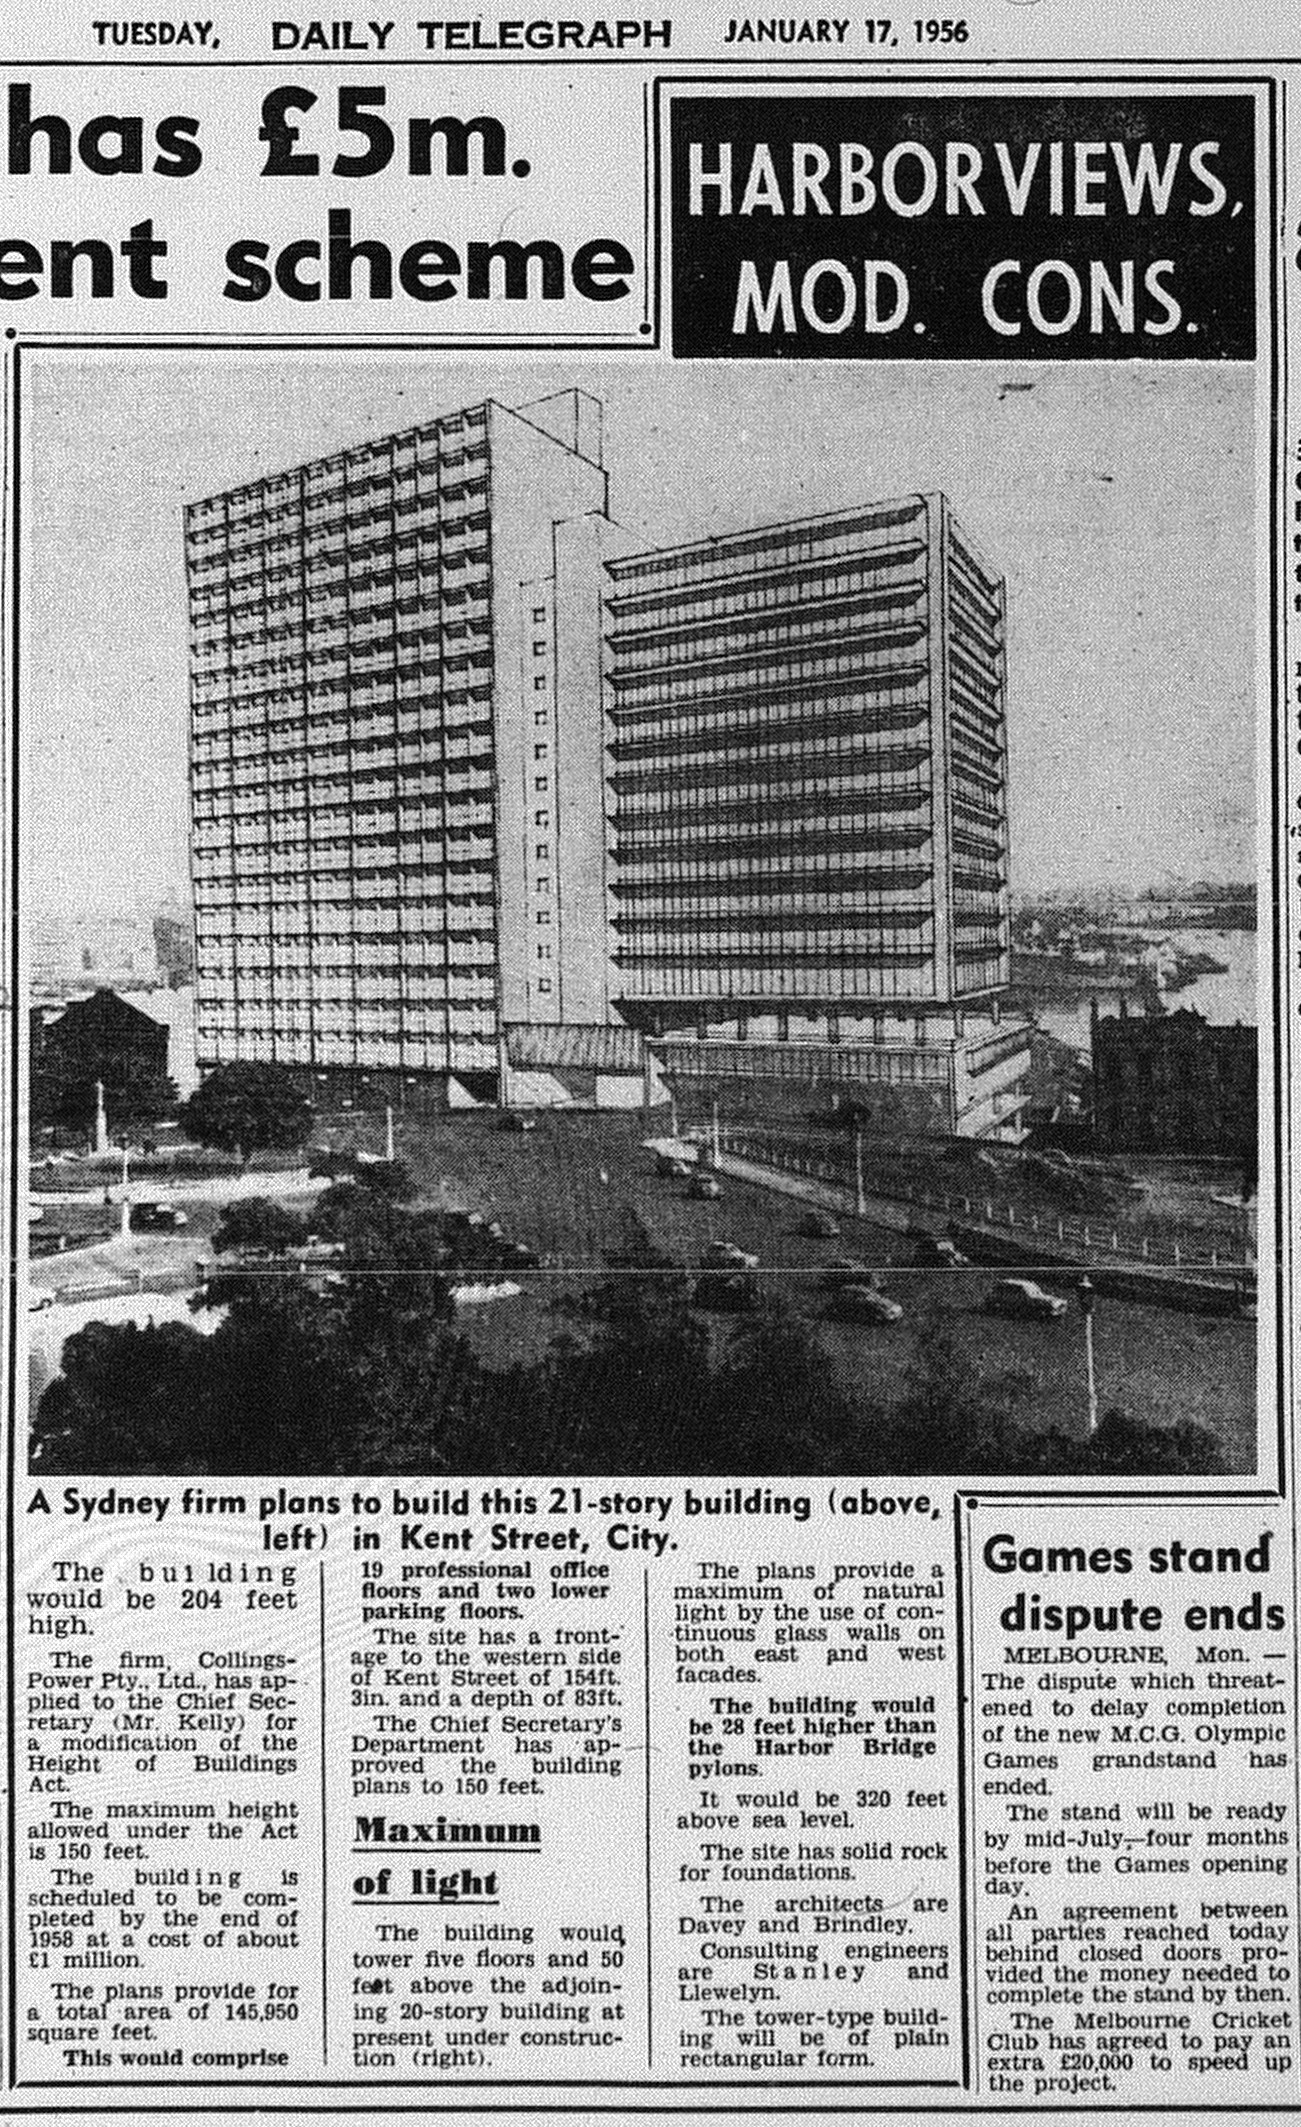 ADC House January 17 1956 daily telegraph 17